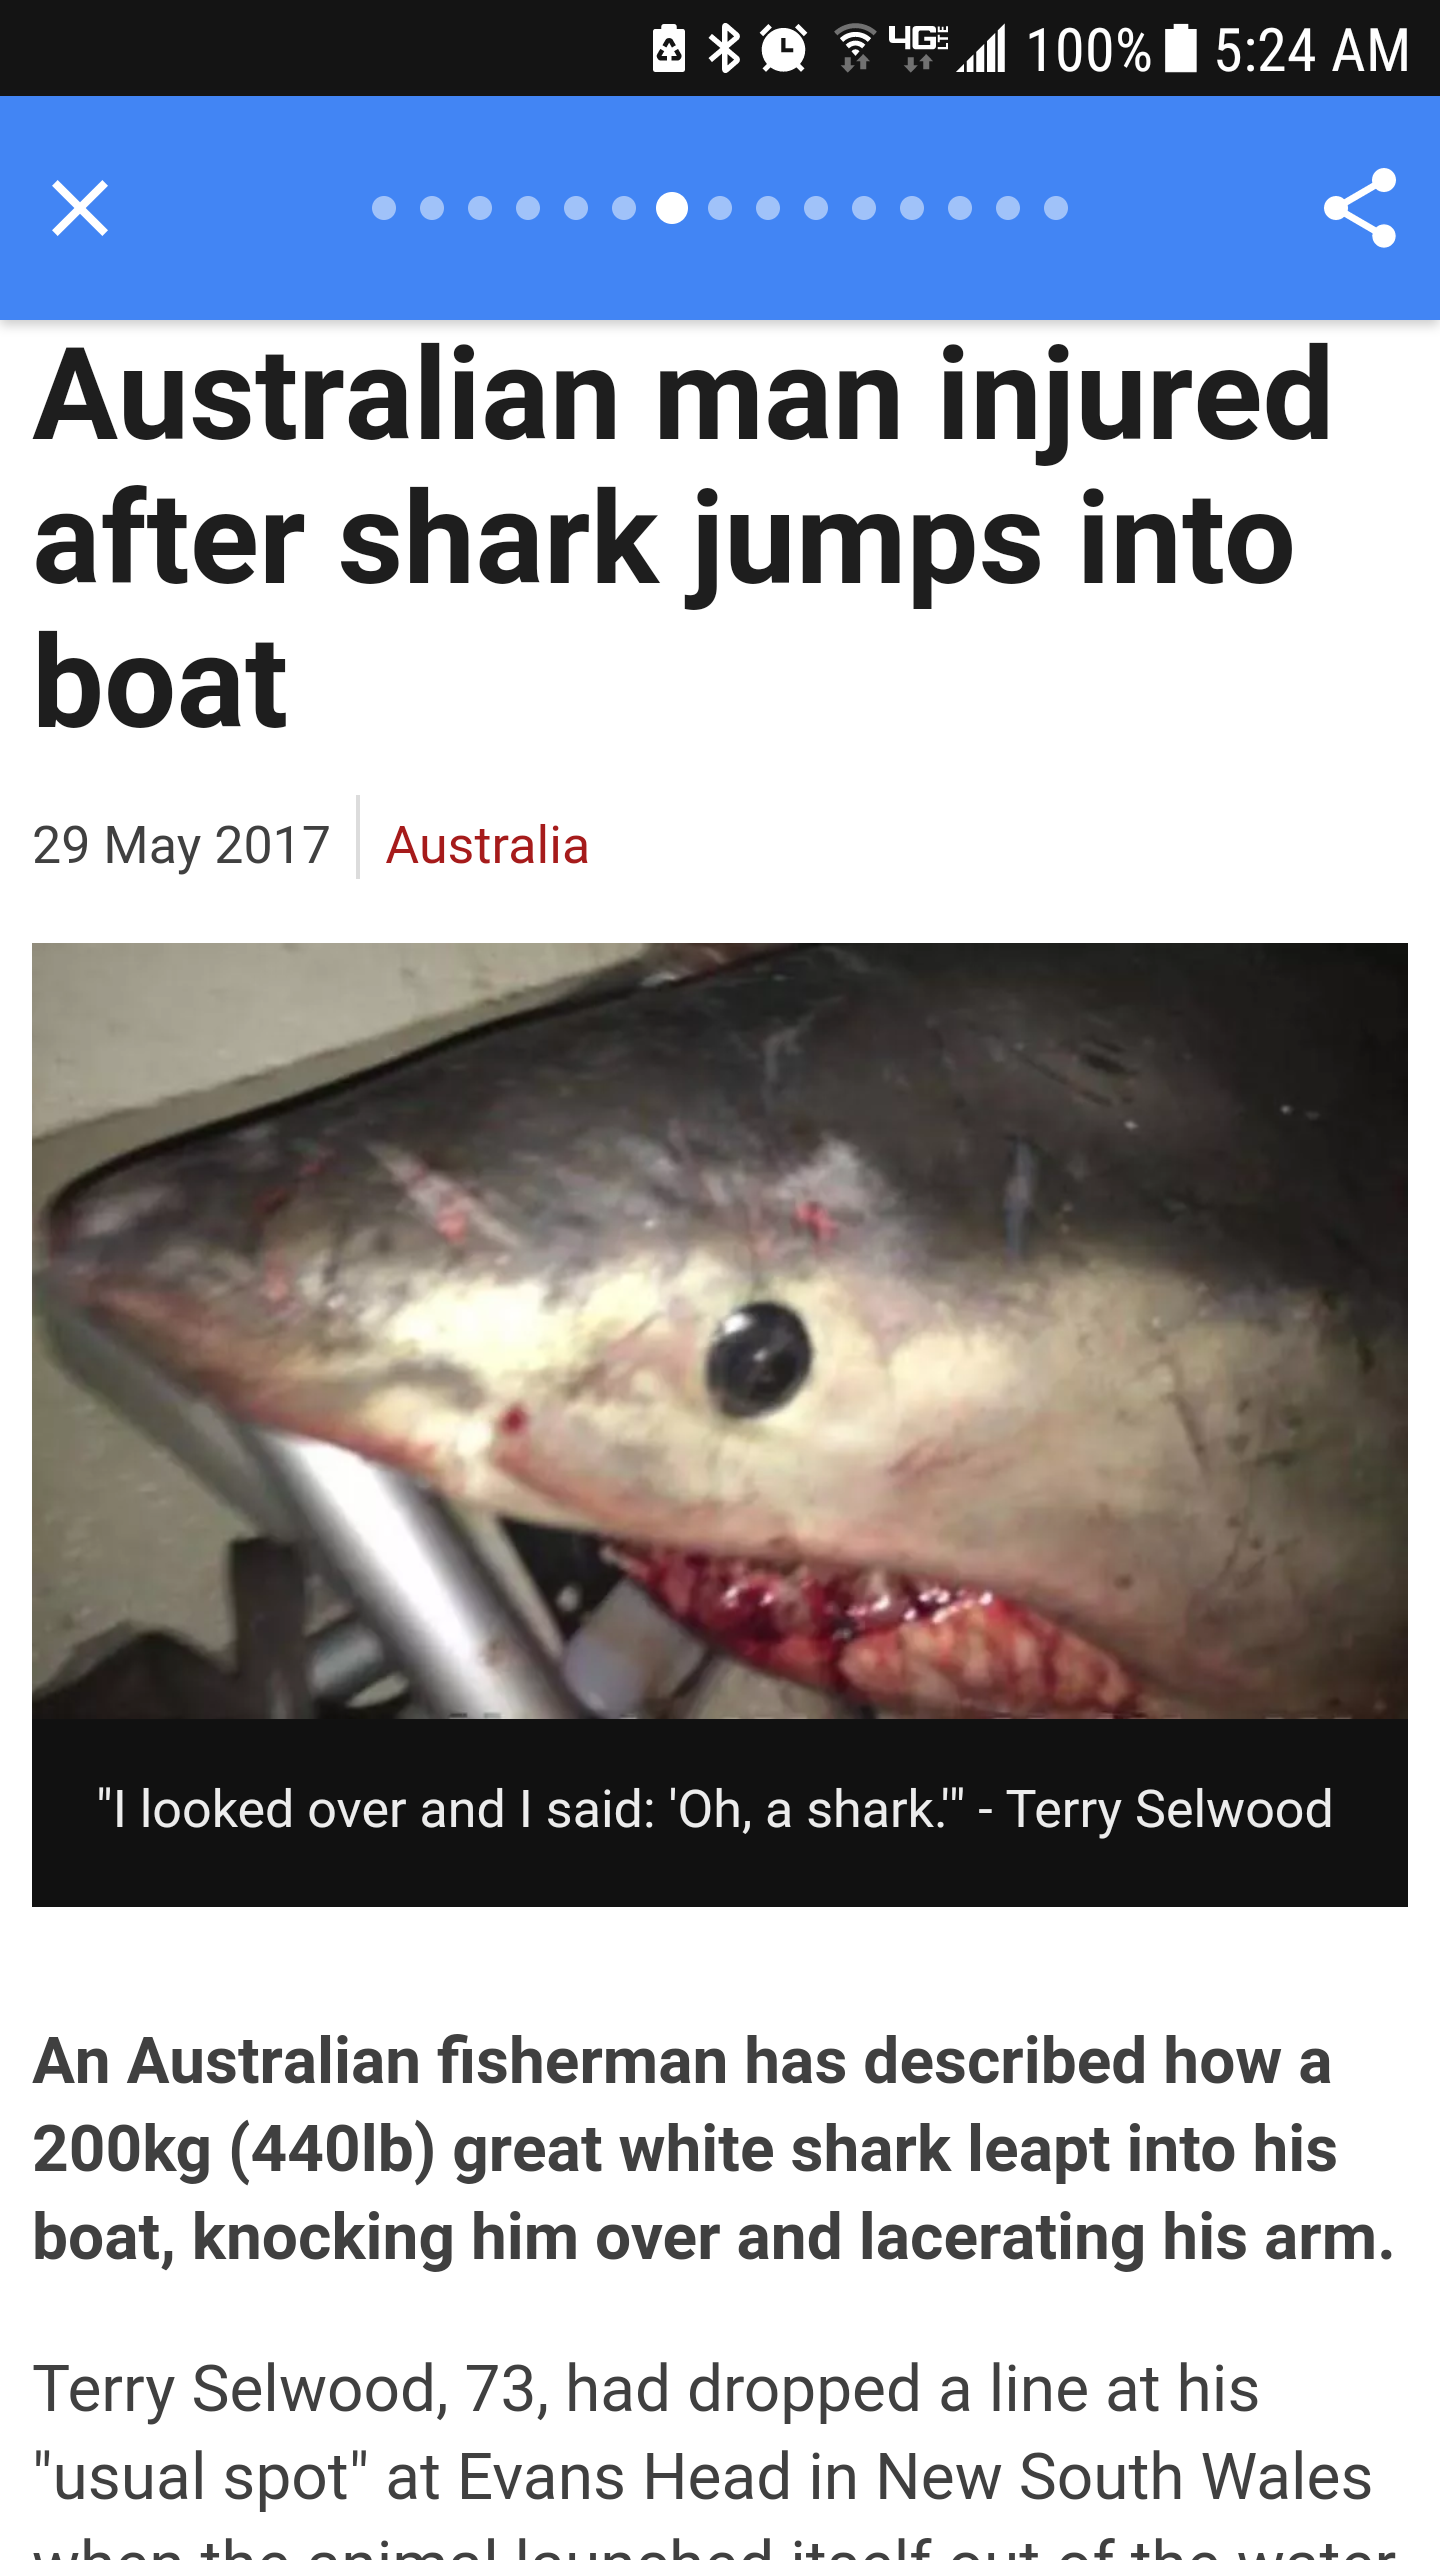 I can't think of a more Australian response to seeing a 440 lb Great White shark jump into your boat.